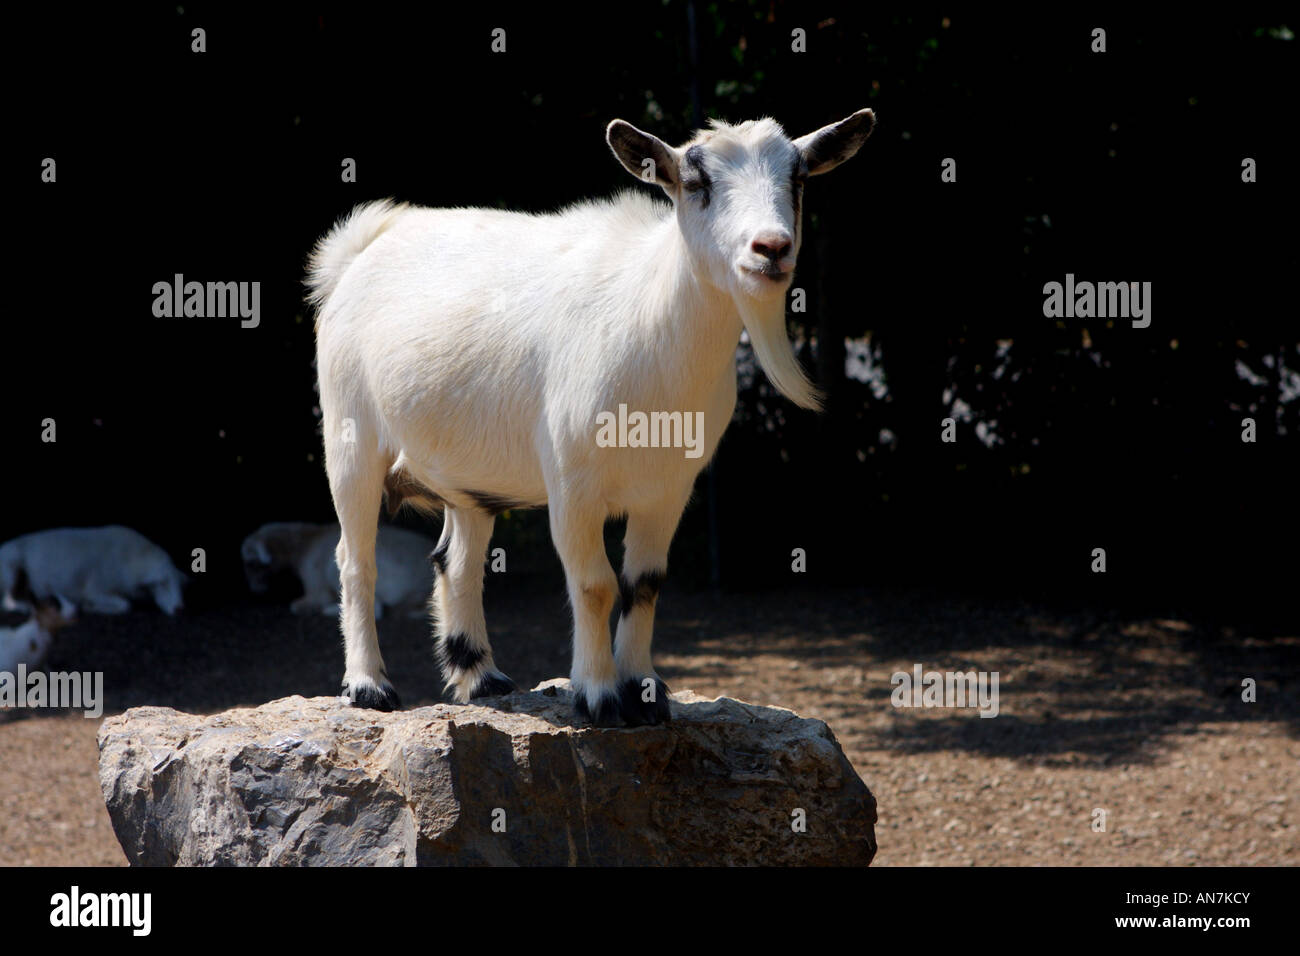 Alpha goat takes his place at the top Stock Photo